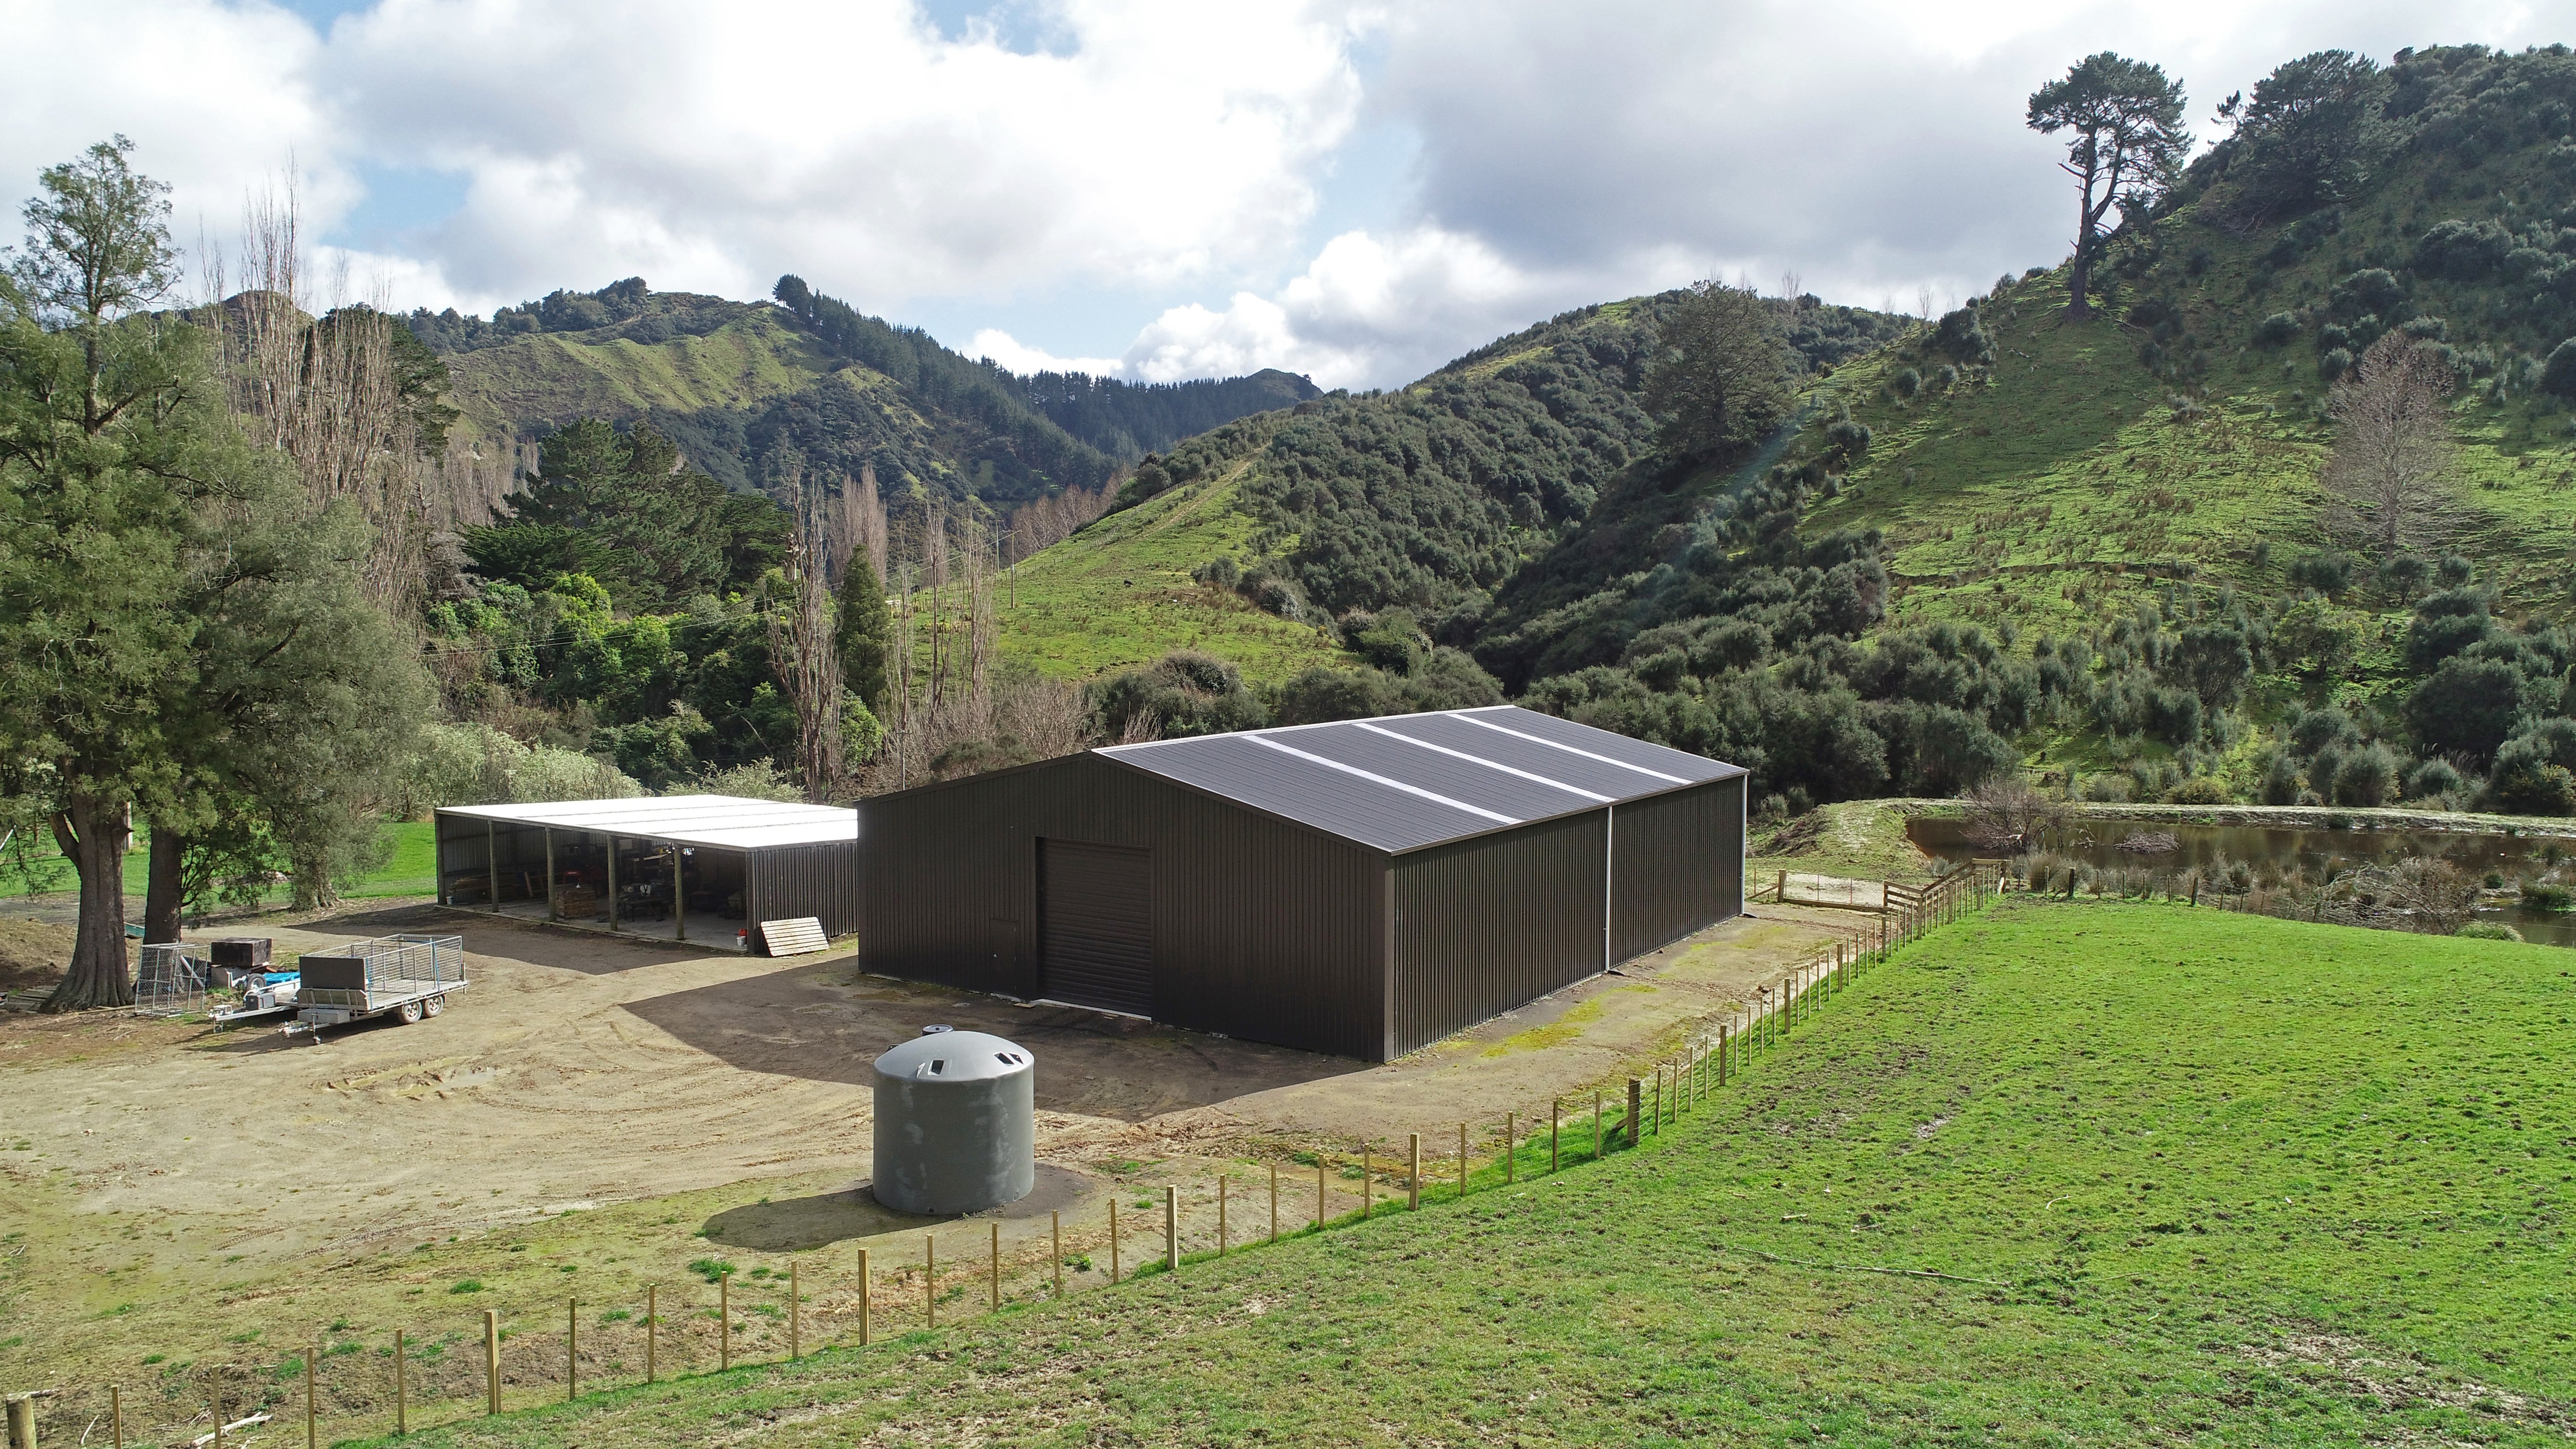 This steel shed is the perfect solution for this bee farmer to get the most out of his farm.